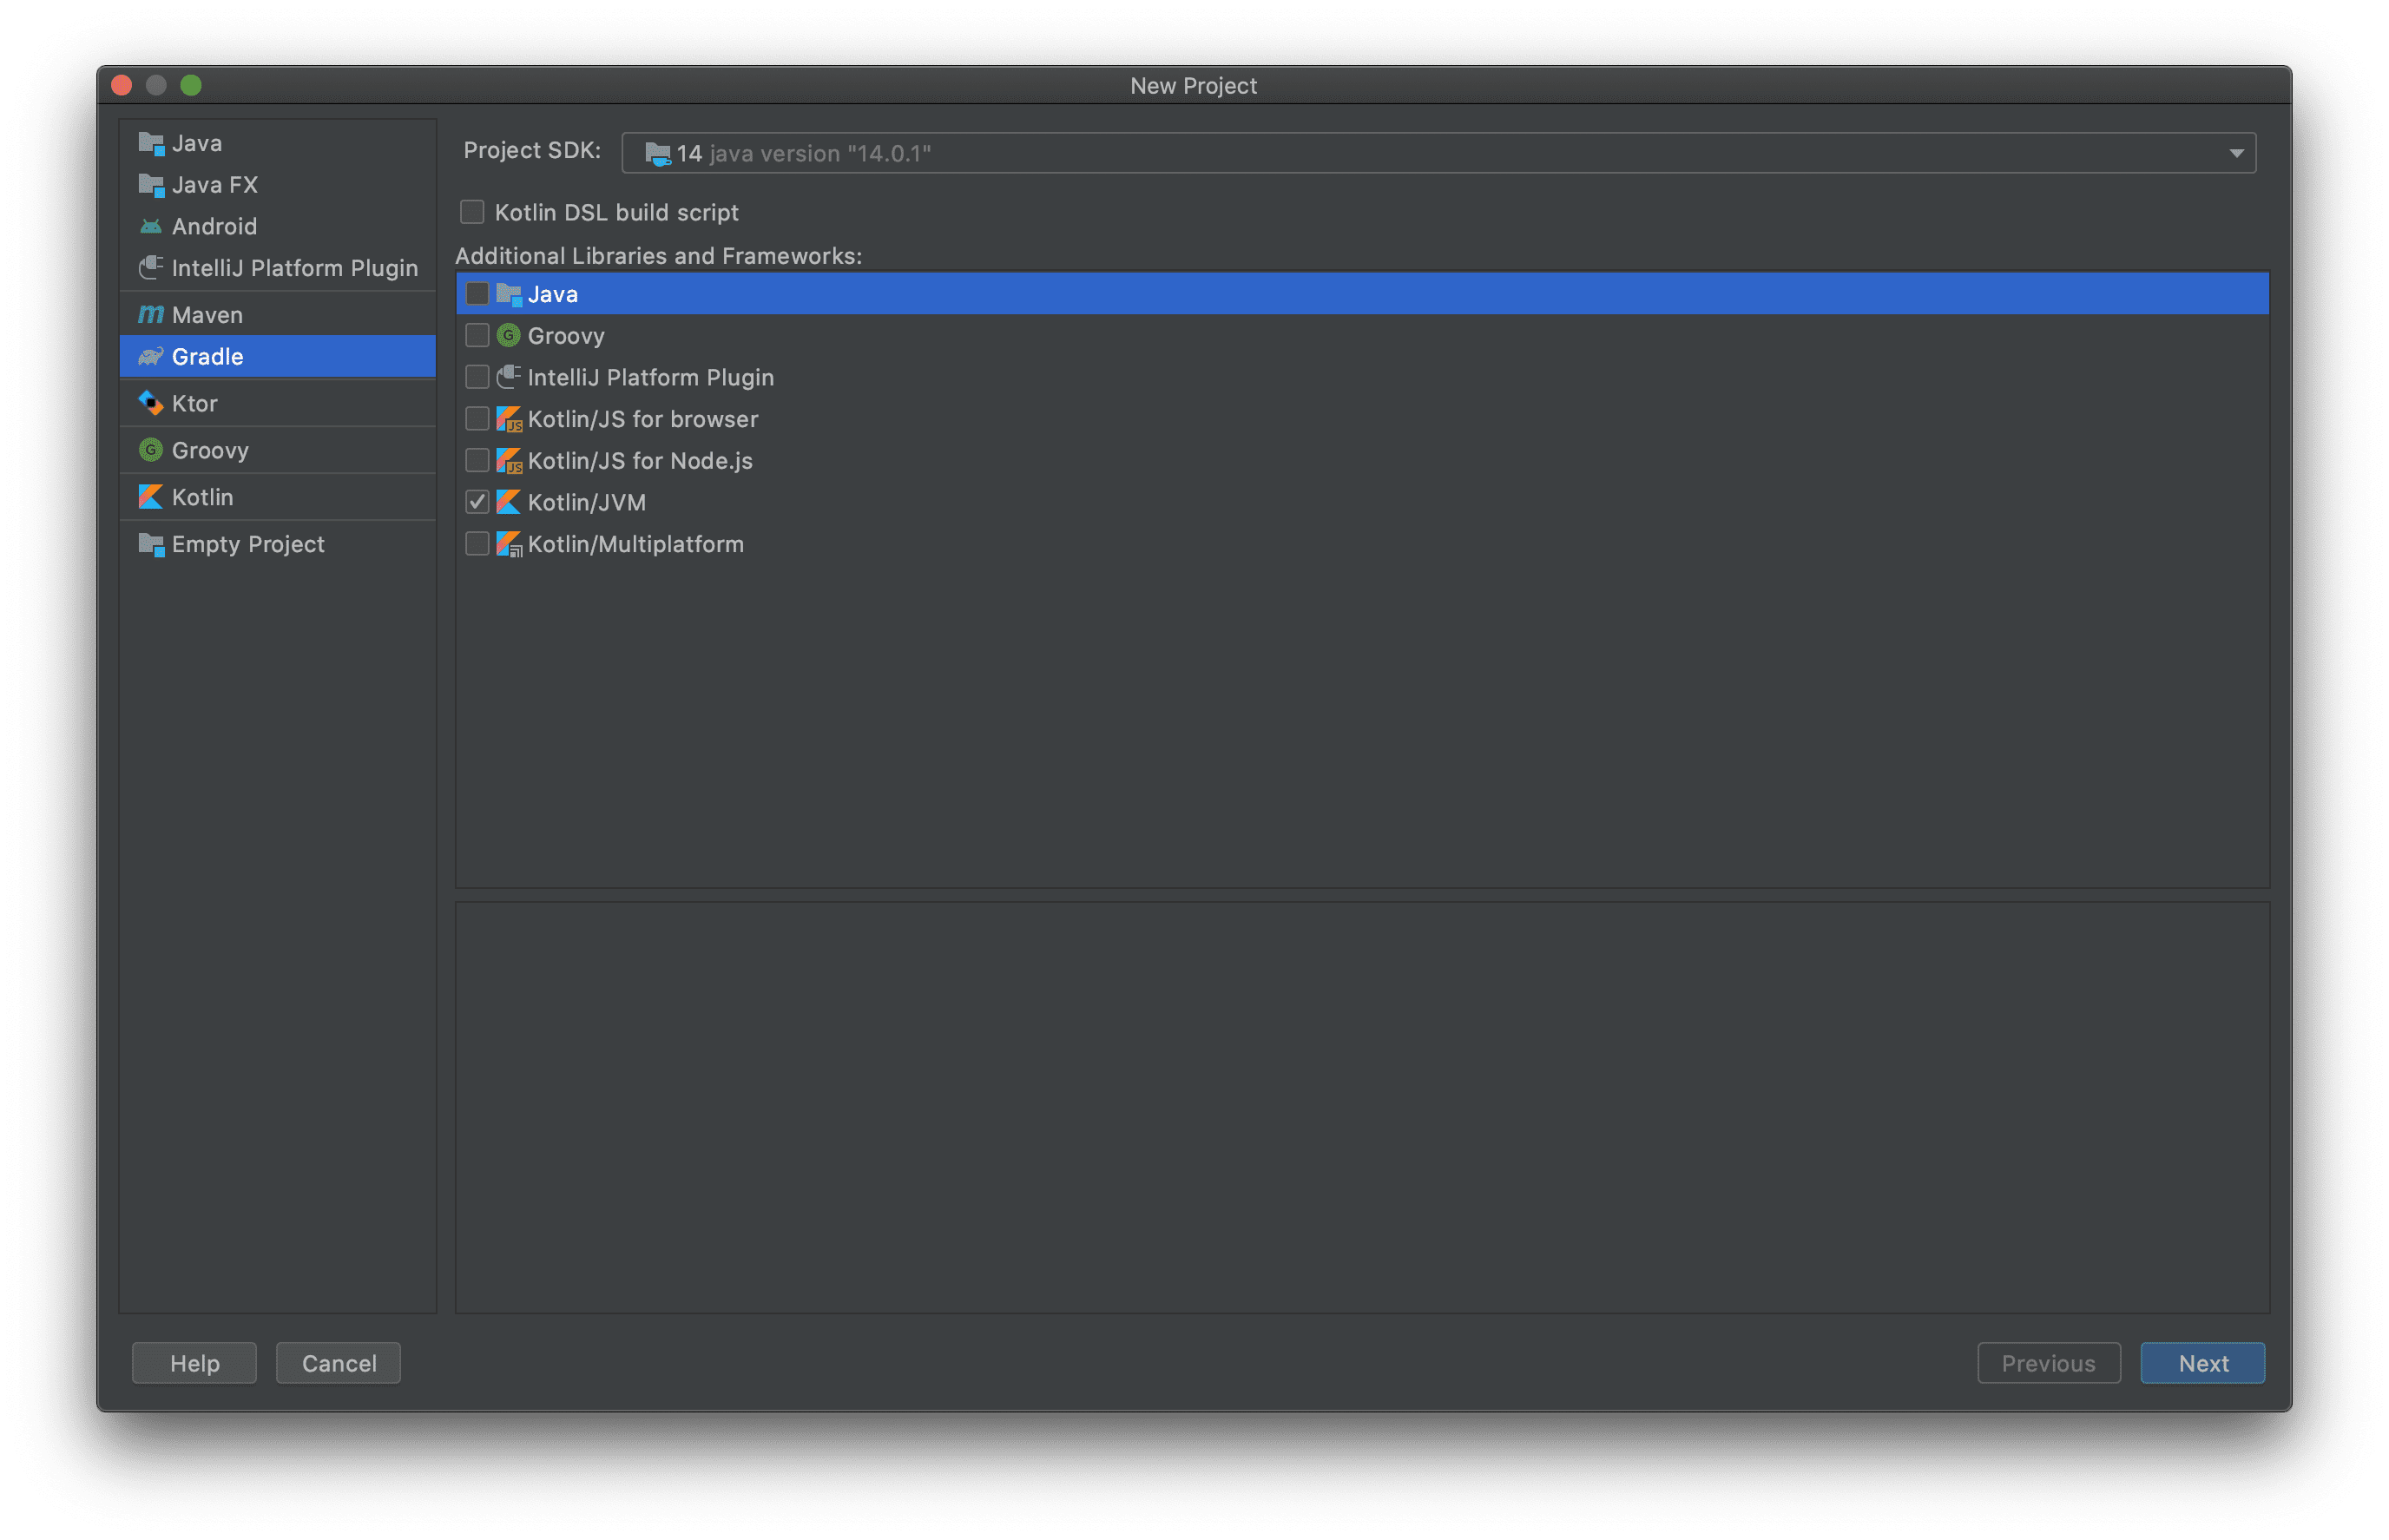 Initial with intelliJ